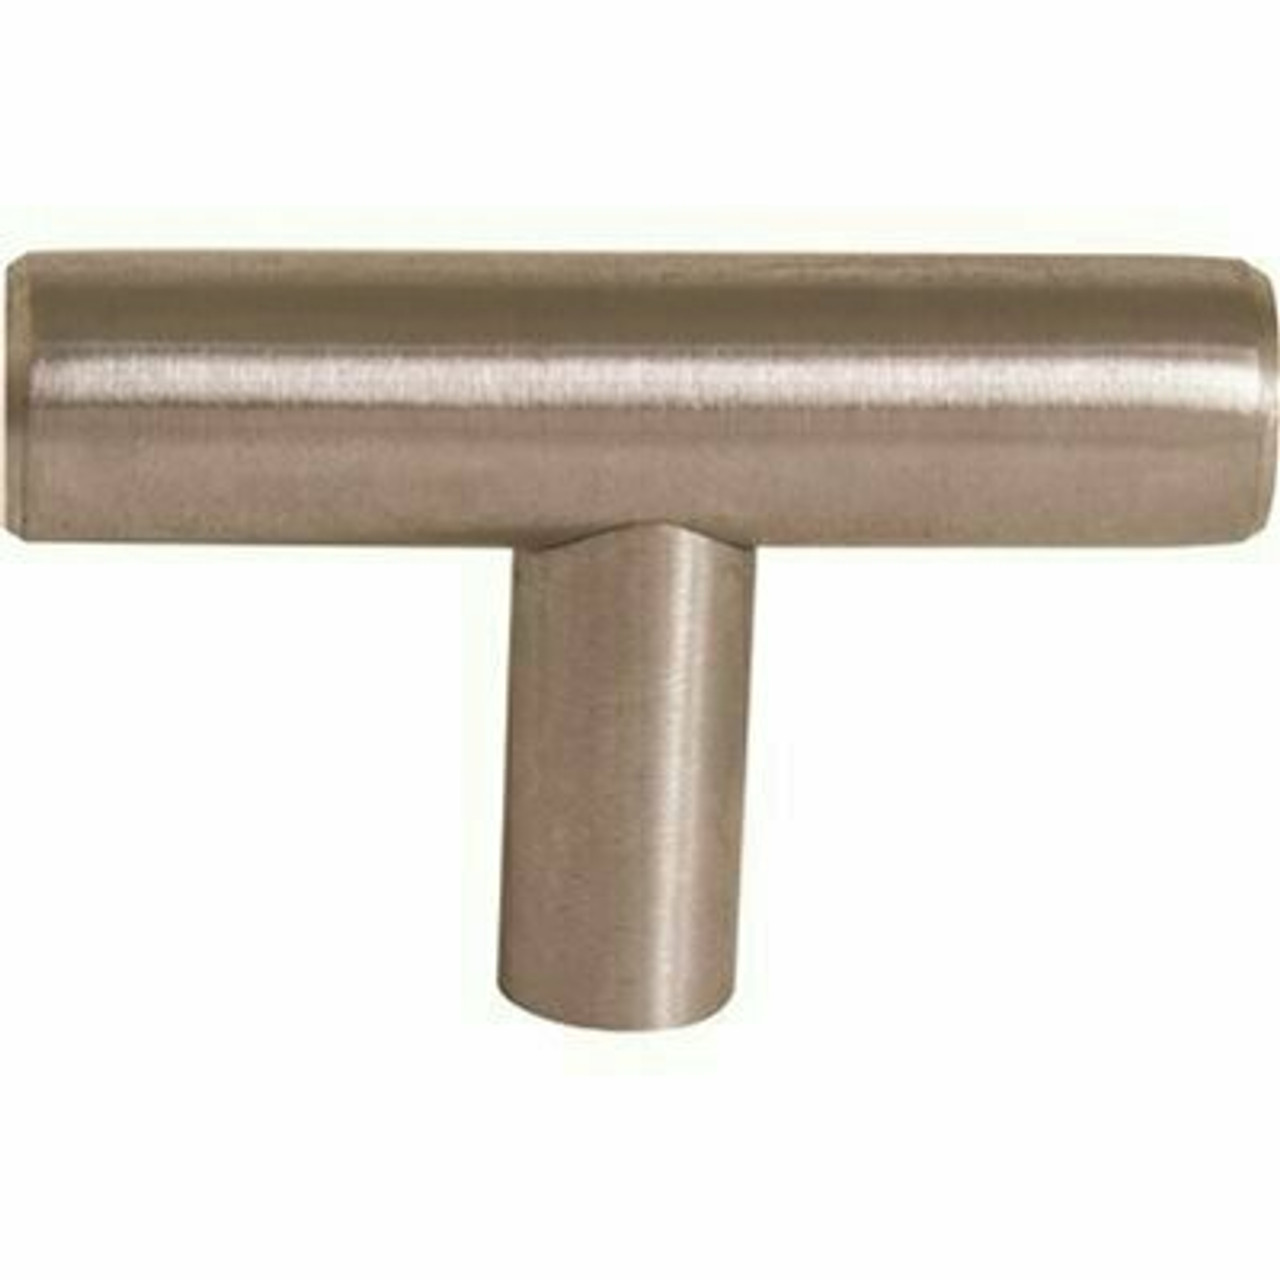 Anvil Mark 2 In. Satin Nickel Hollow Stainless Steel Drawer Pull (5-Pack)